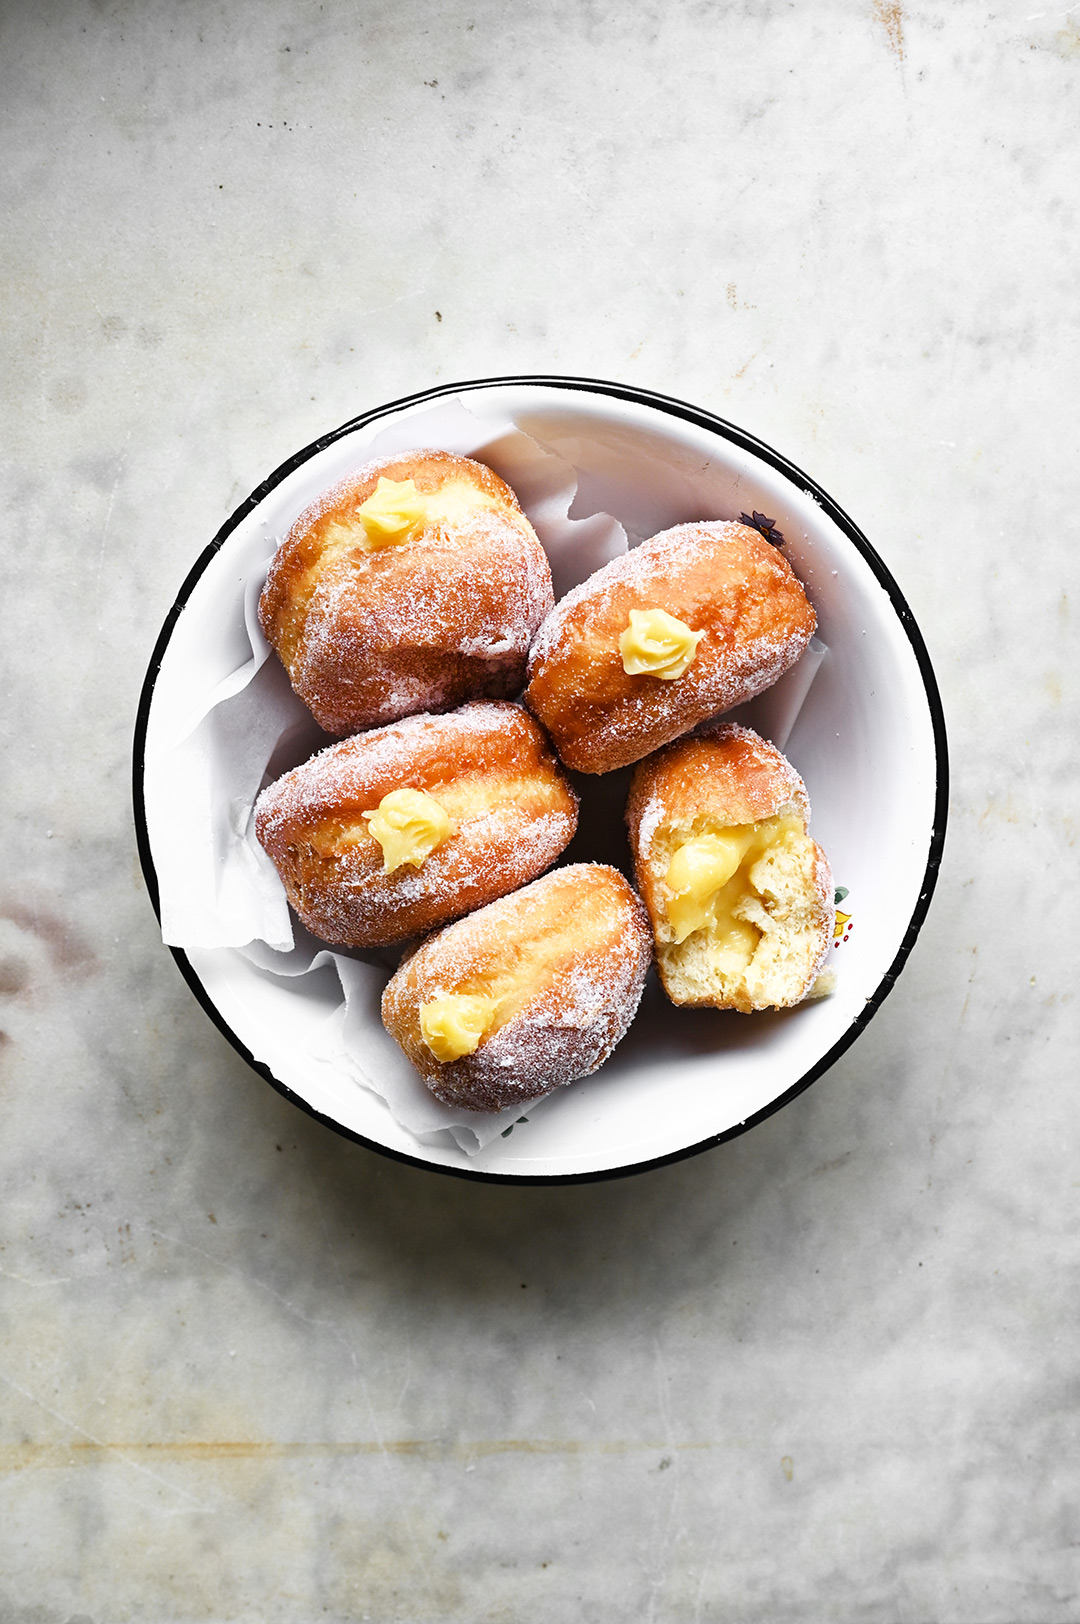 serving dumplings | Soft and chewy donuts with lemon curd